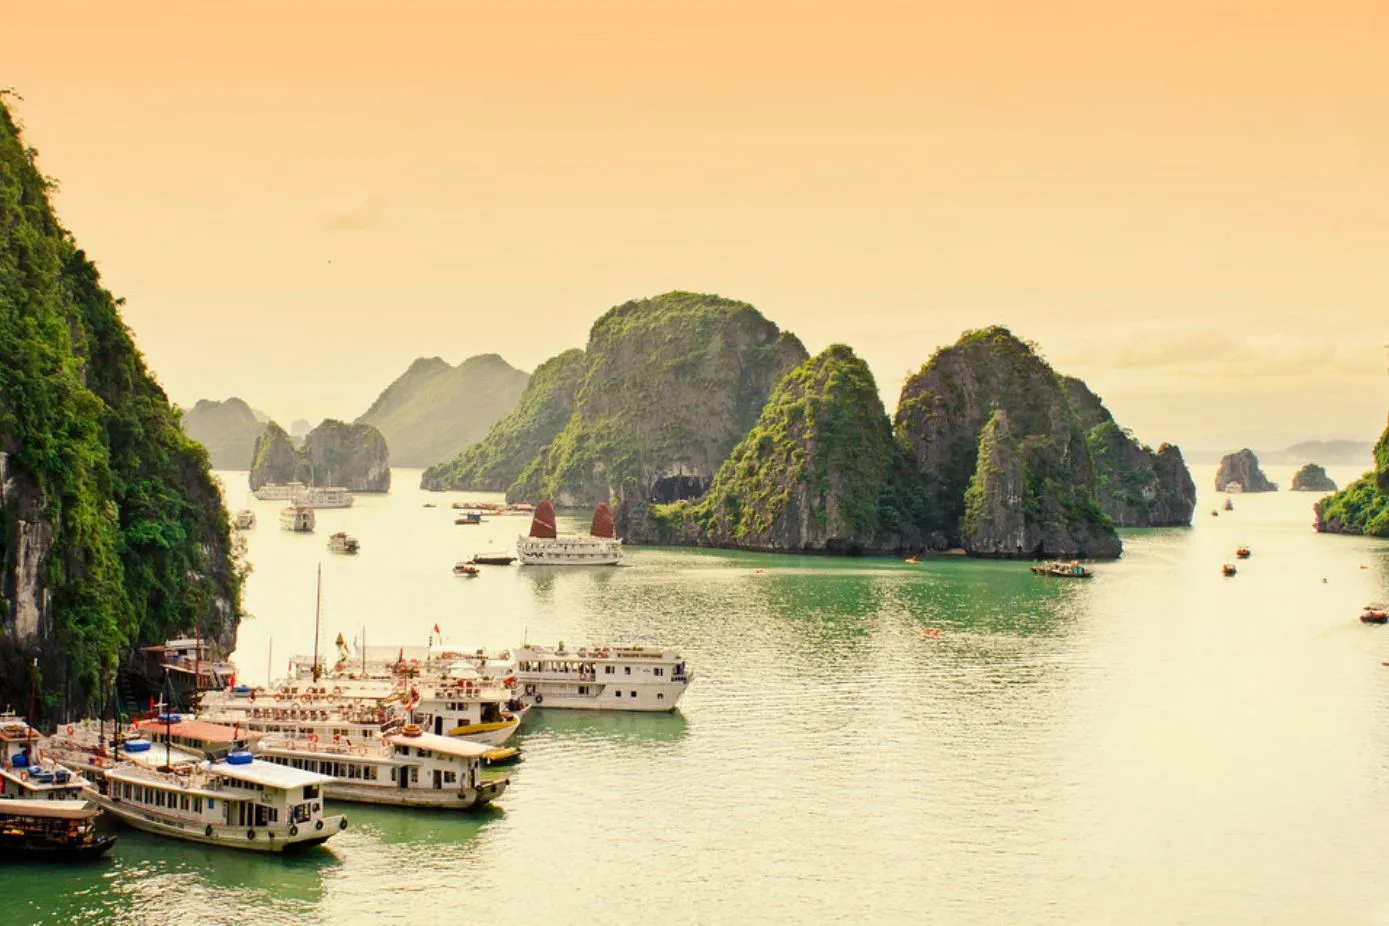 Travel Guide to Vietnam